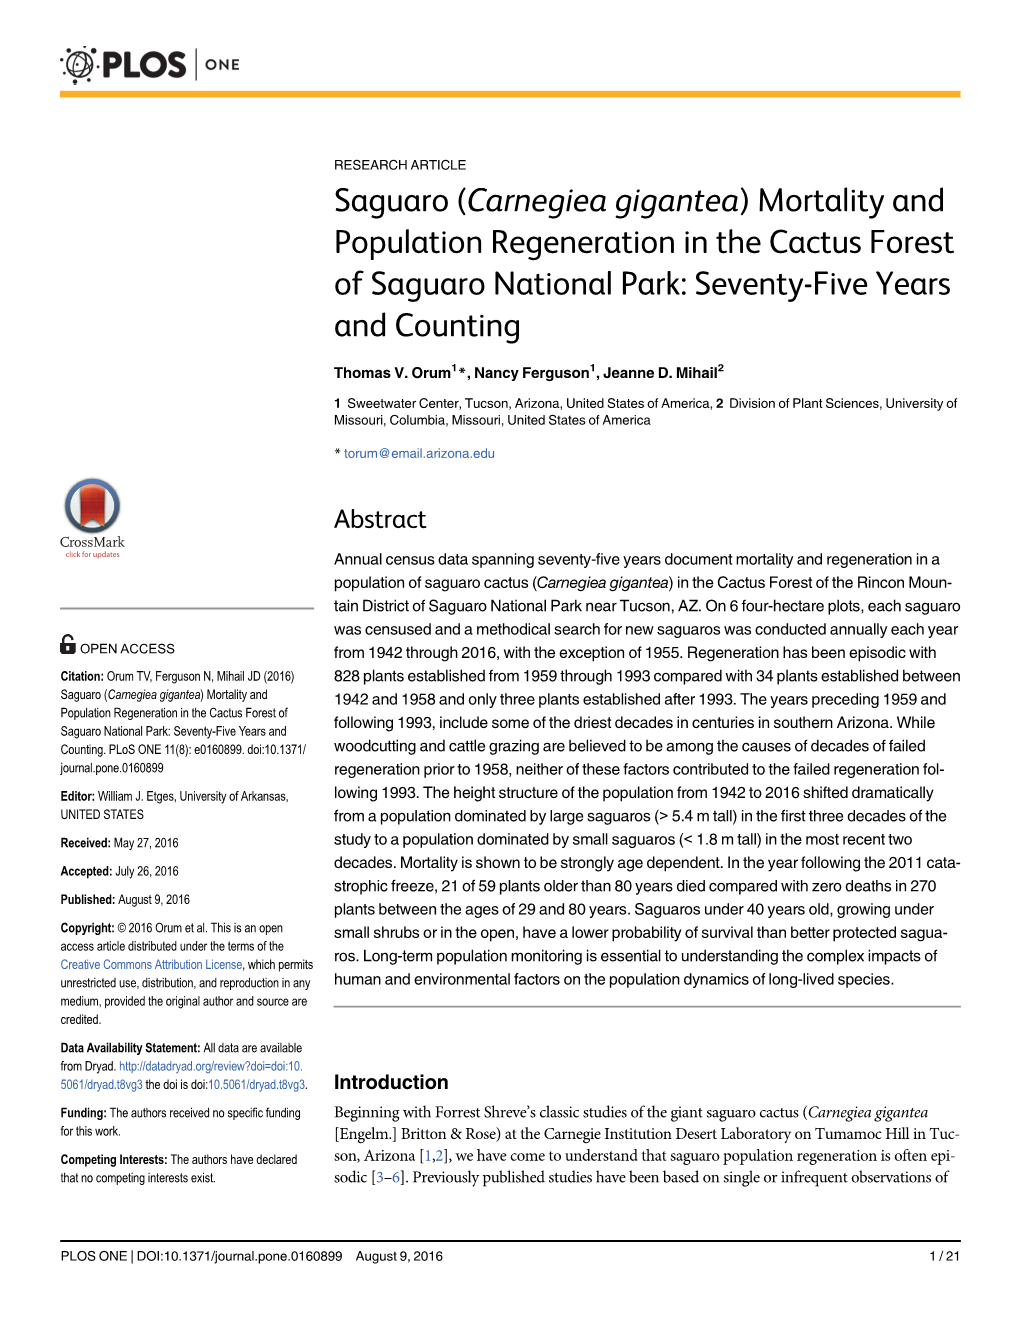 (Carnegiea Gigantea) Mortality and Population Regeneration in the Cactus Forest of Saguaro National Park: Seventy-Five Years and Counting